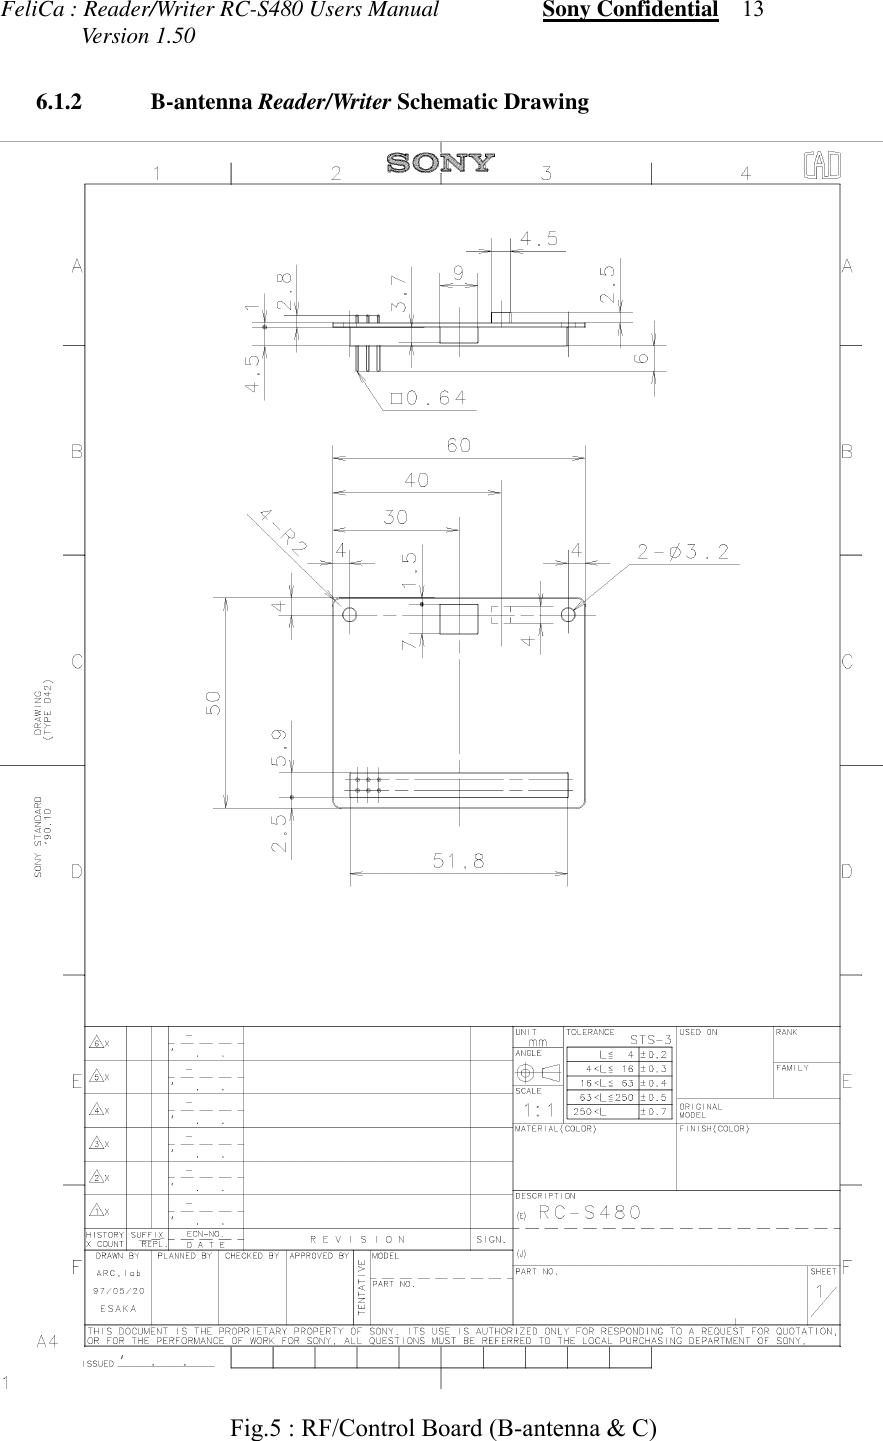 FeliCa : Reader/Writer RC-S480 Users Manual                  Sony Confidential    13              Version 1.50 6.1.2 B-antenna Reader/Writer Schematic DrawingFig.5 : RF/Control Board (B-antenna &amp; C)